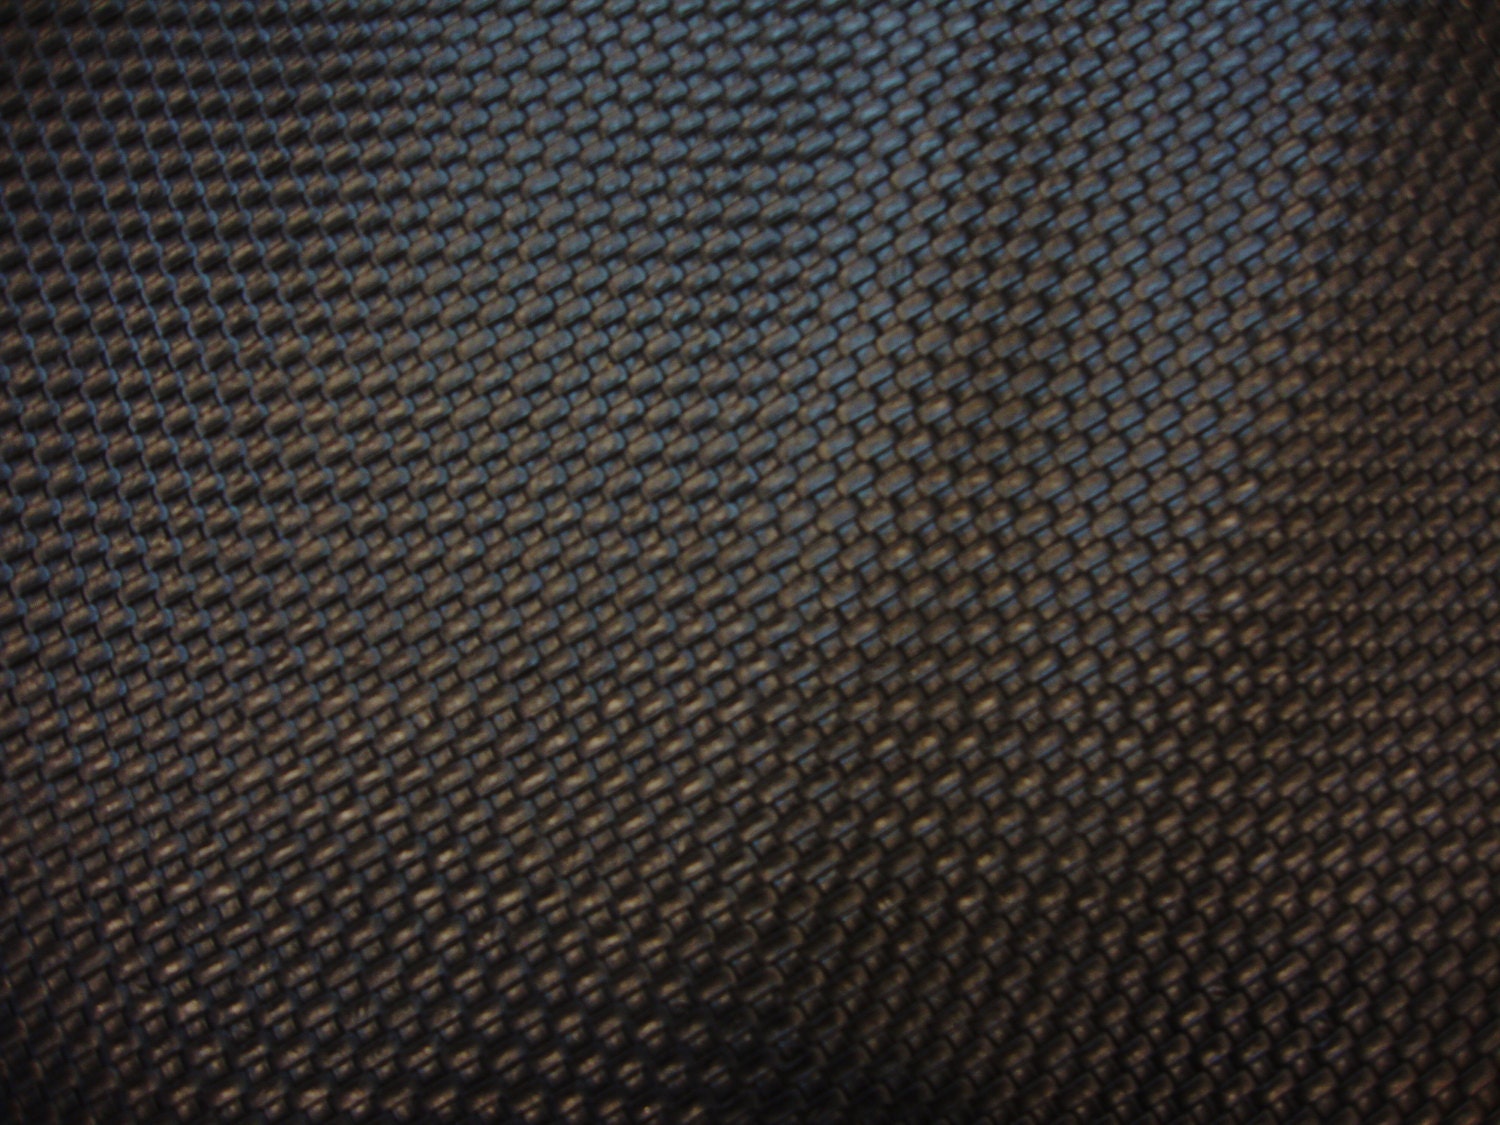 Vinyl Faux Leather Fabric Basket Weave, Faux Leather Fabric By The Yard